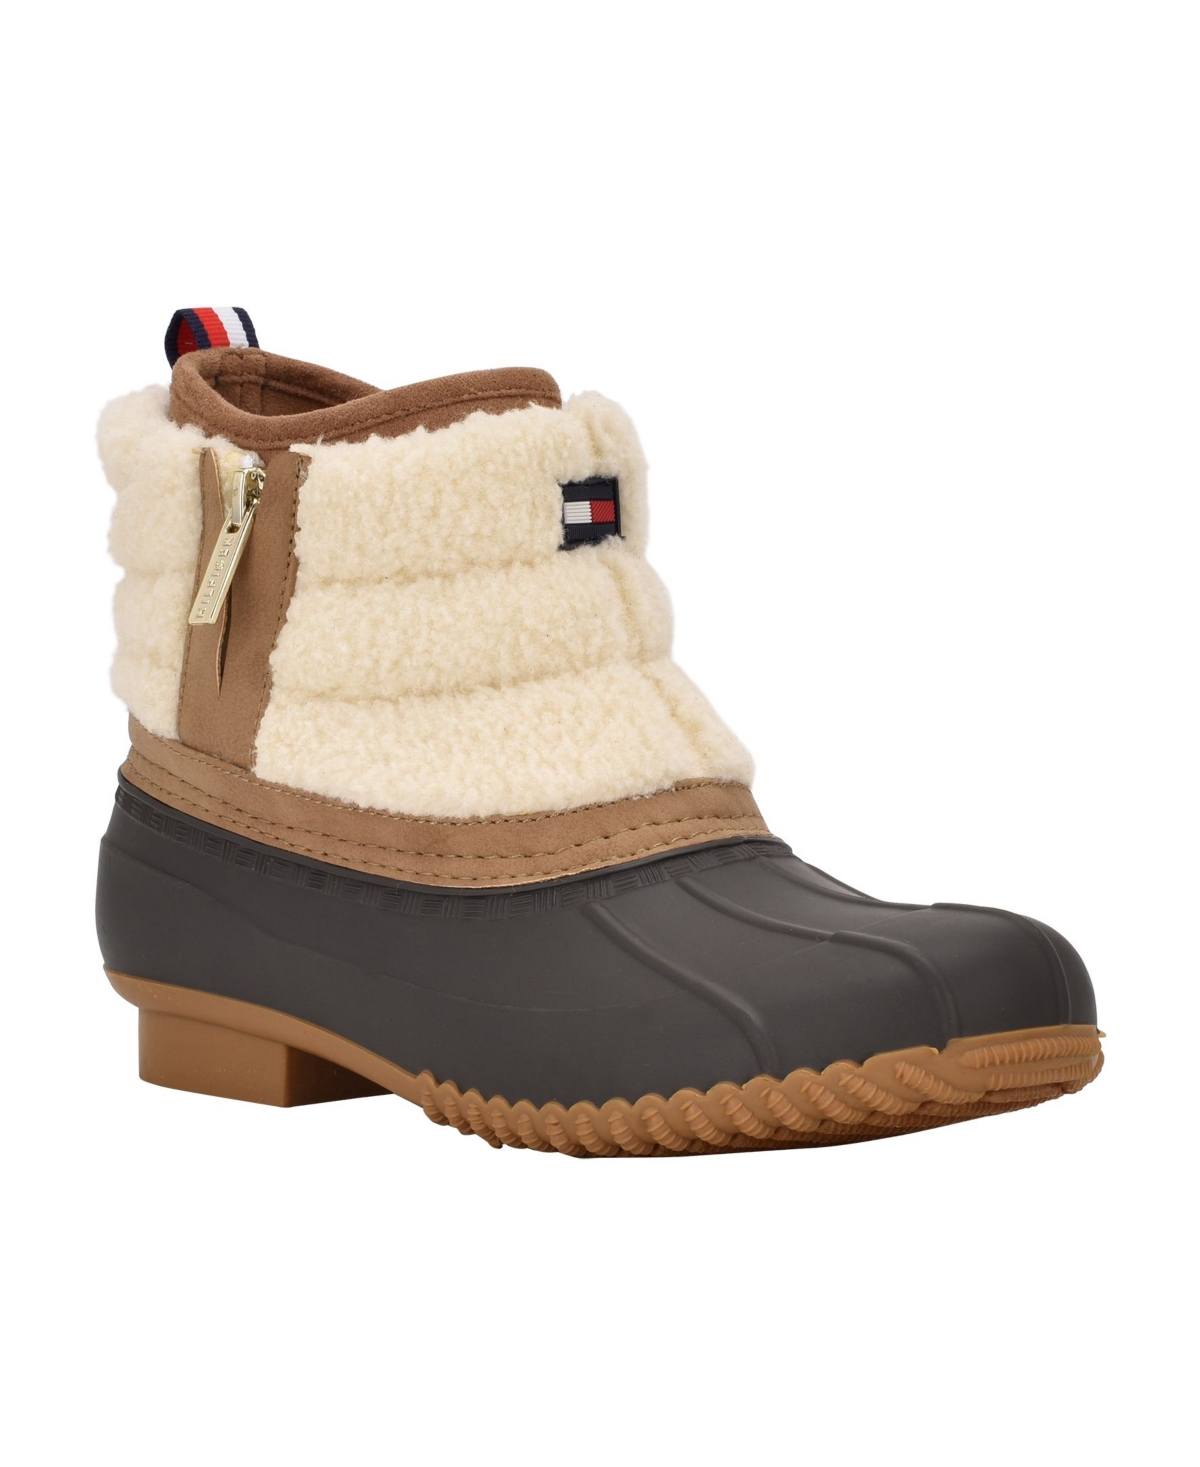 UPC 195972709805 product image for Tommy Hilfiger Women's Roana Zip Up Duck Booties Women's Shoes | upcitemdb.com